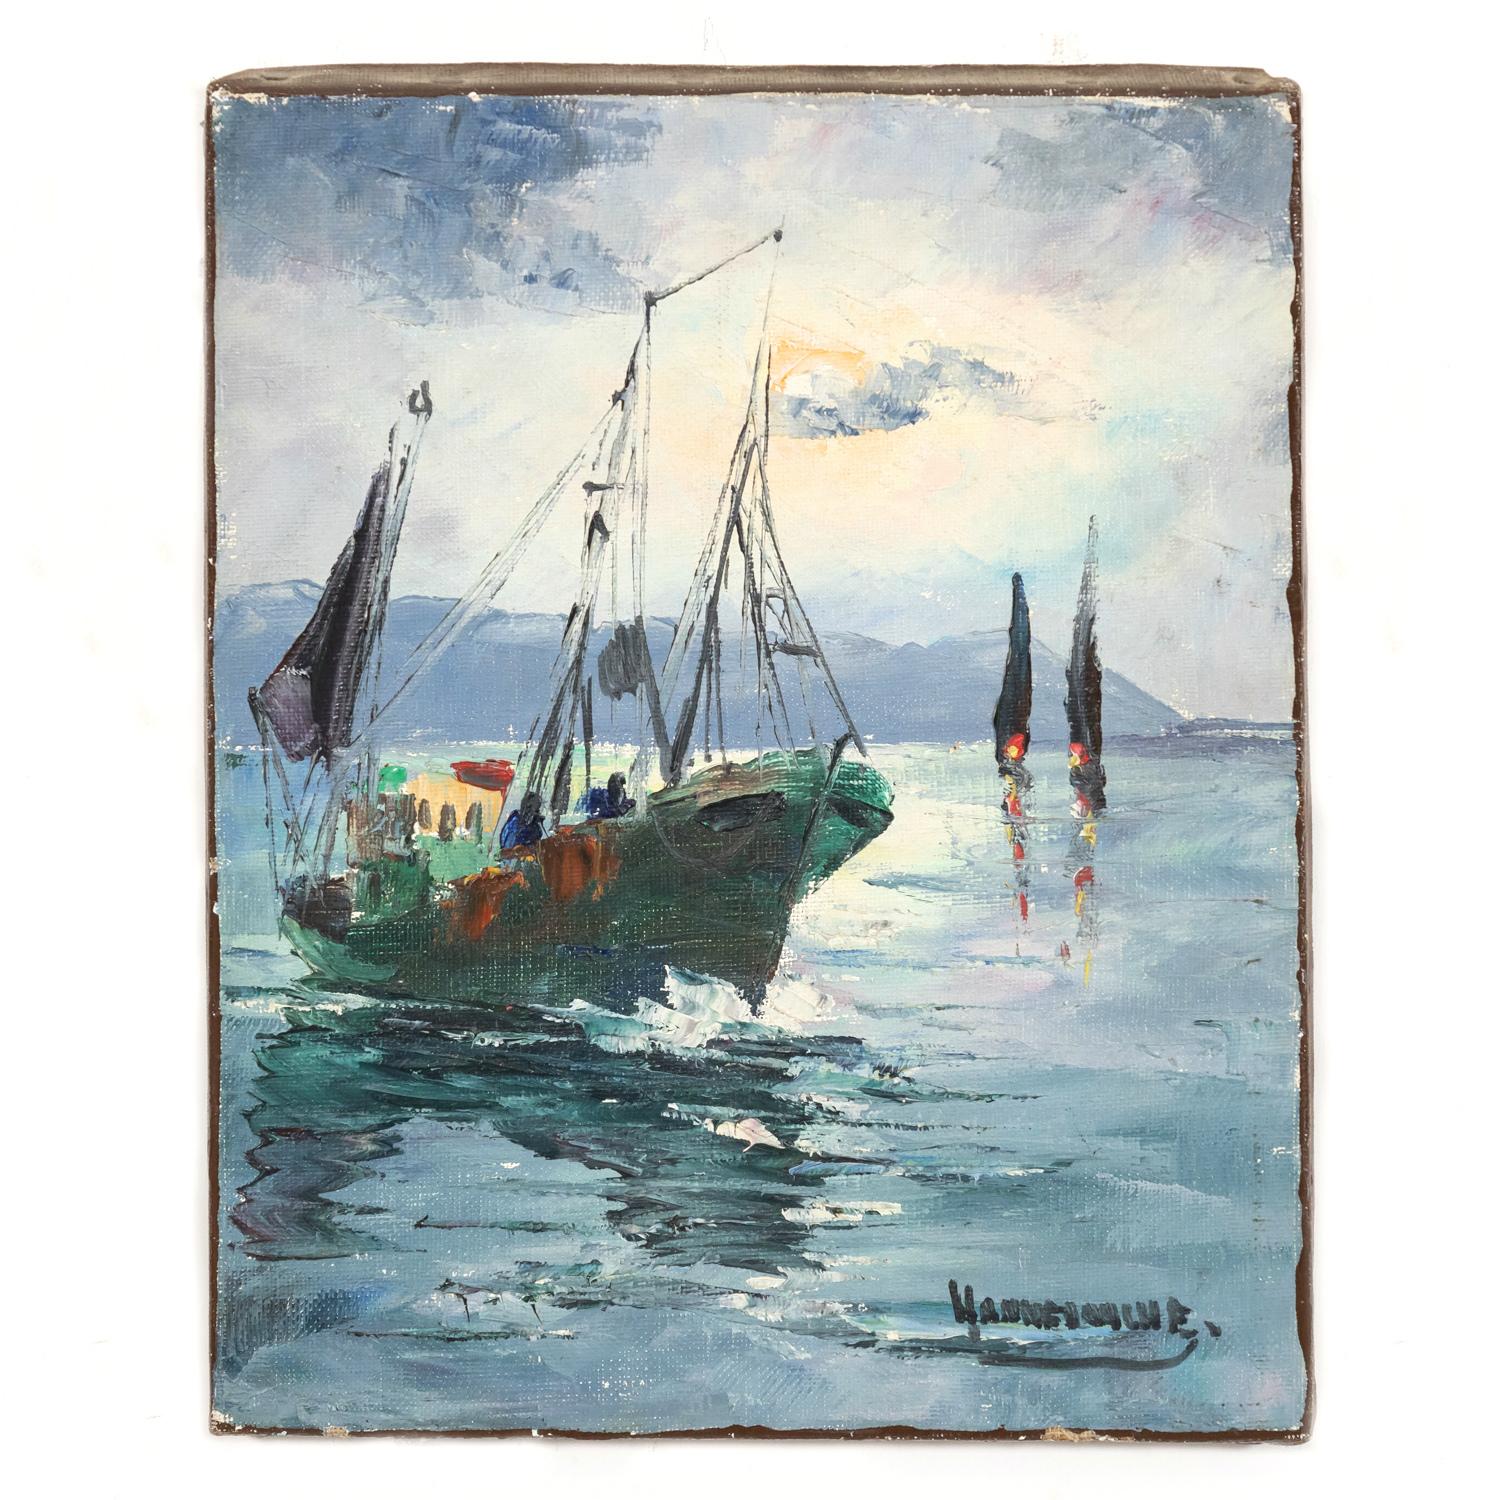 A small oil on canvas French seascape painting, circa 1932s. This beautiful French seascape, probably painted by a local Marseille artist, depicts a fishing boat or barque de pecheur in the turquoise blue waters of the Mediterranean Sea with two